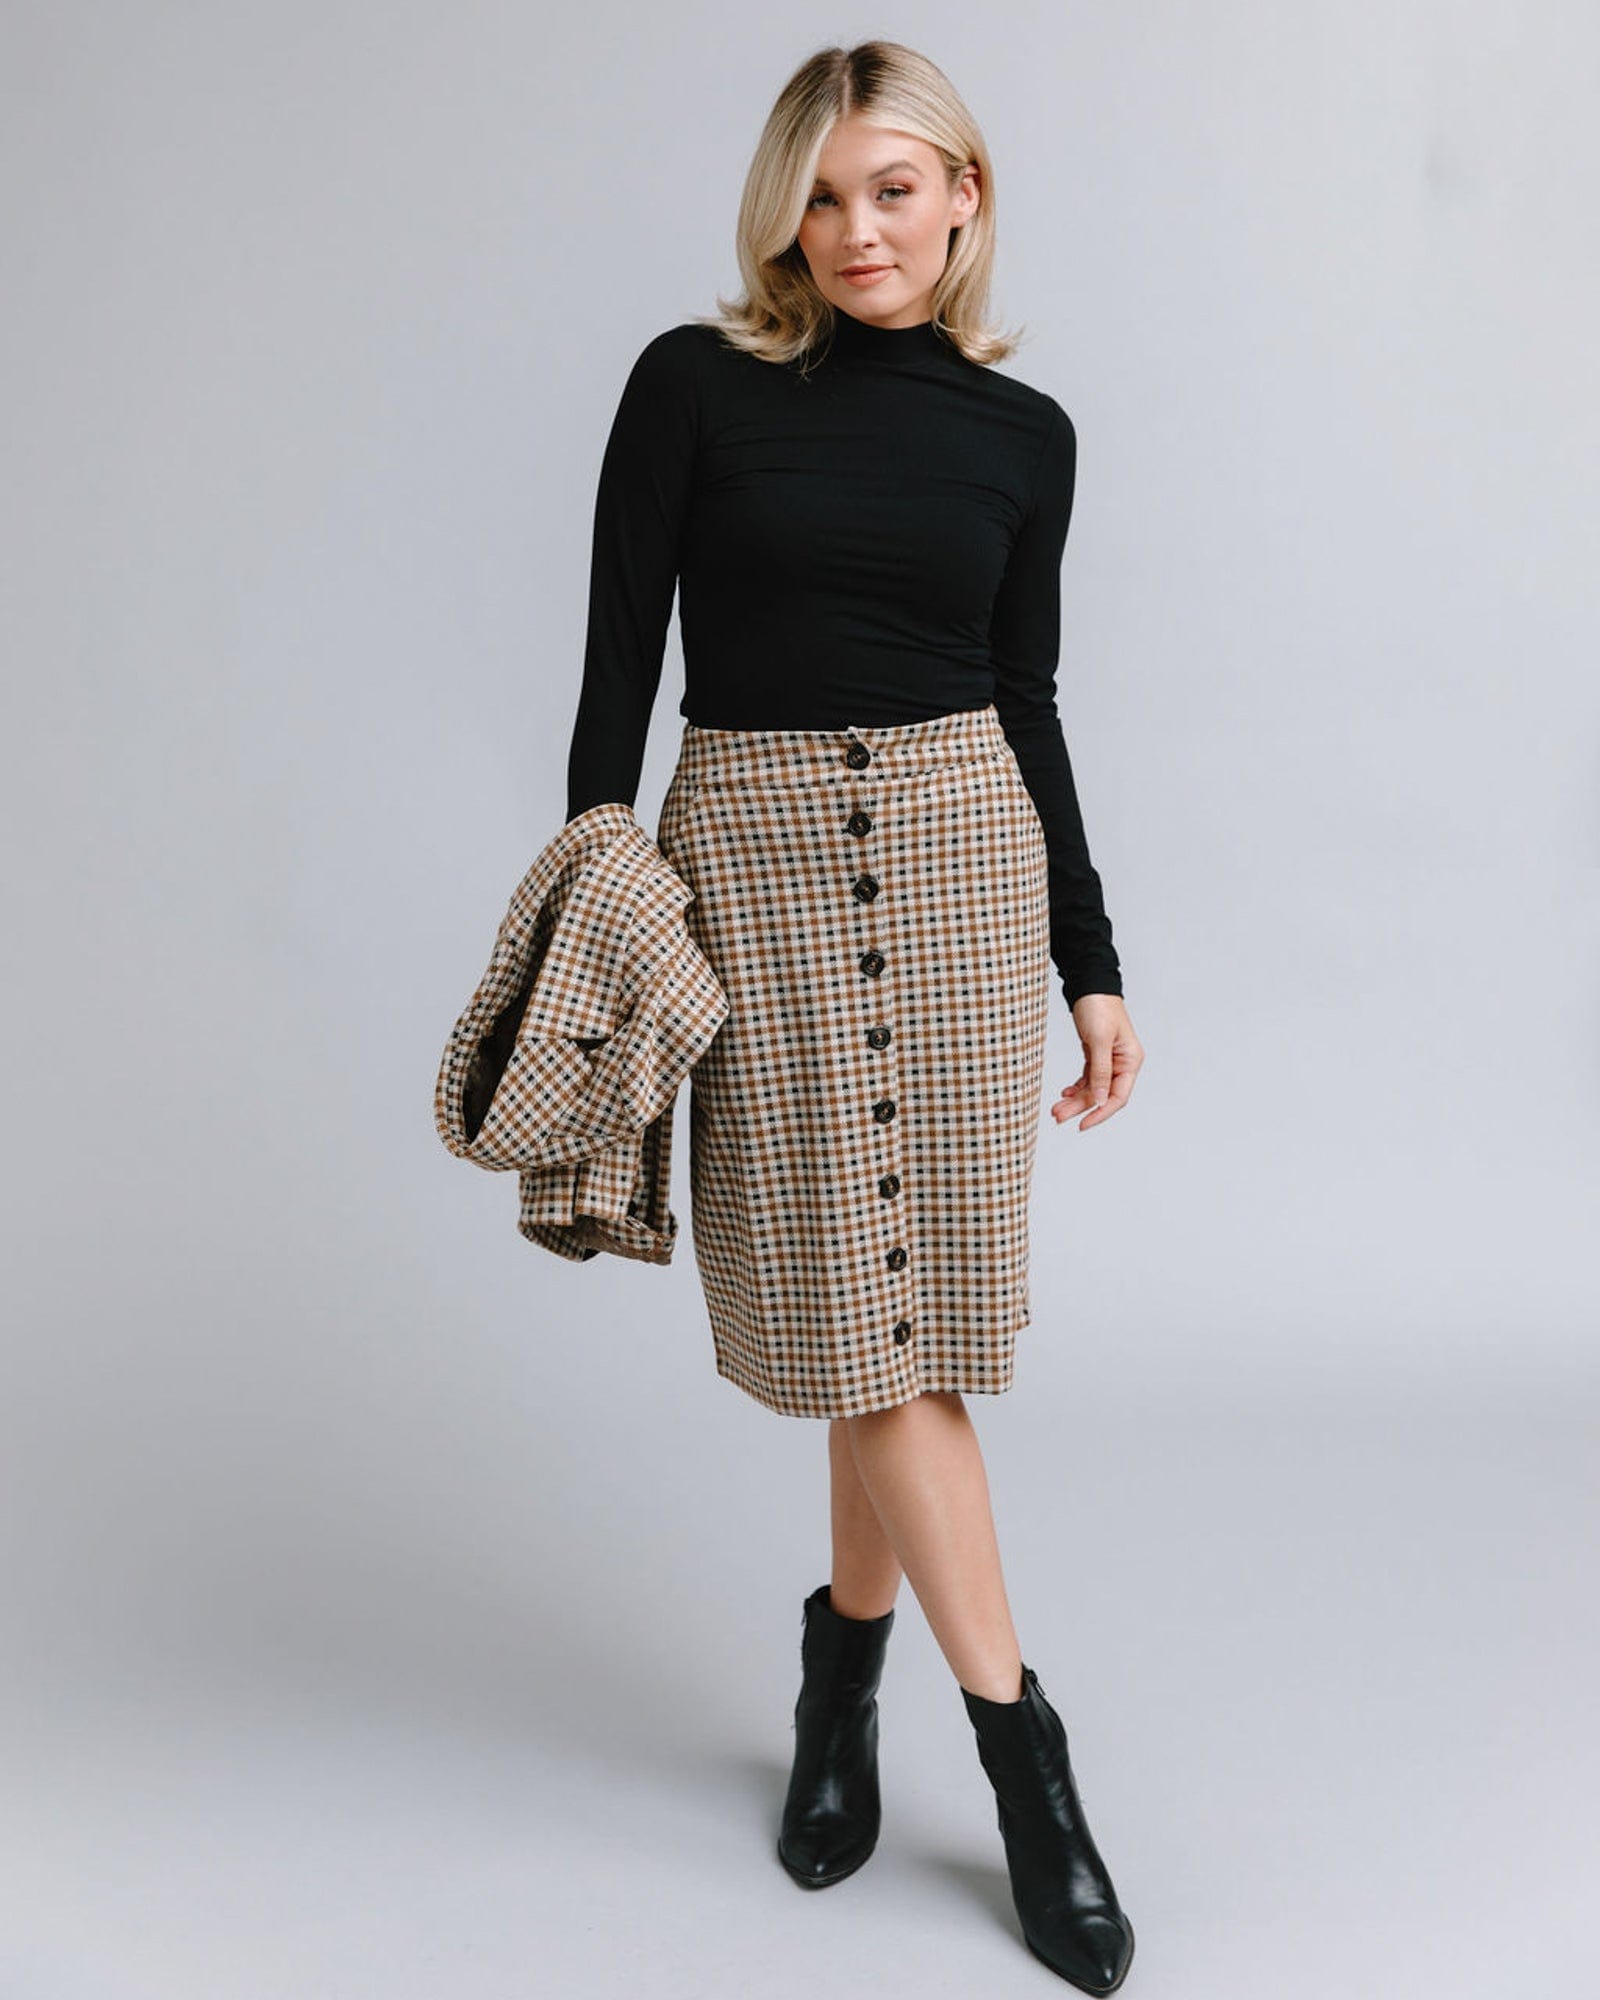 Woman in a knee-length plaid button-down skirt